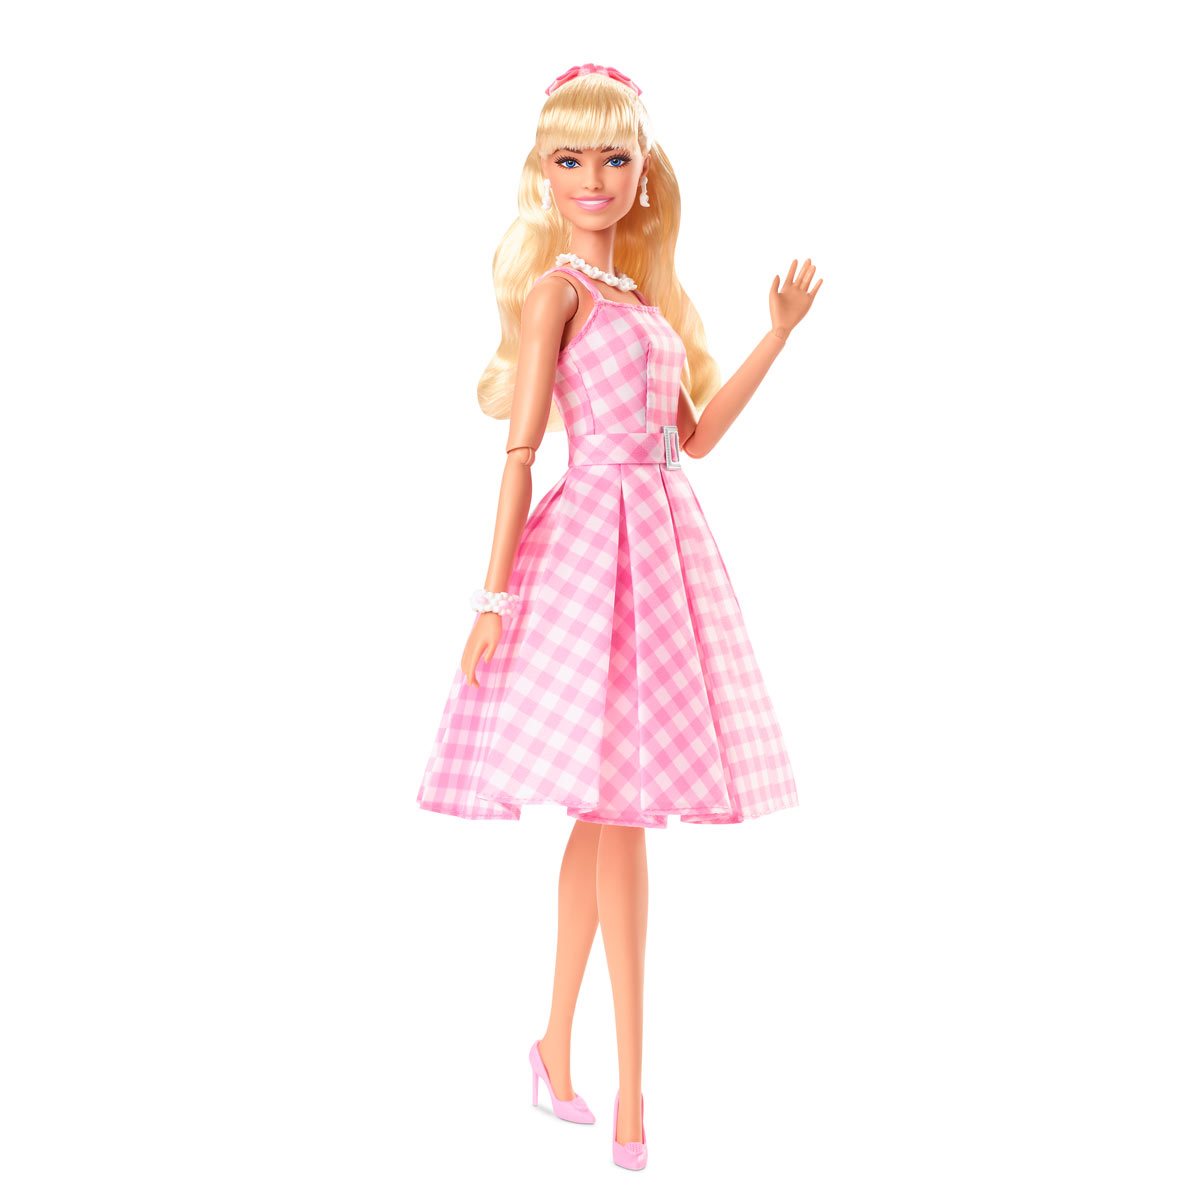 Barbie: The Movie Doll in Pink Gingham Dress